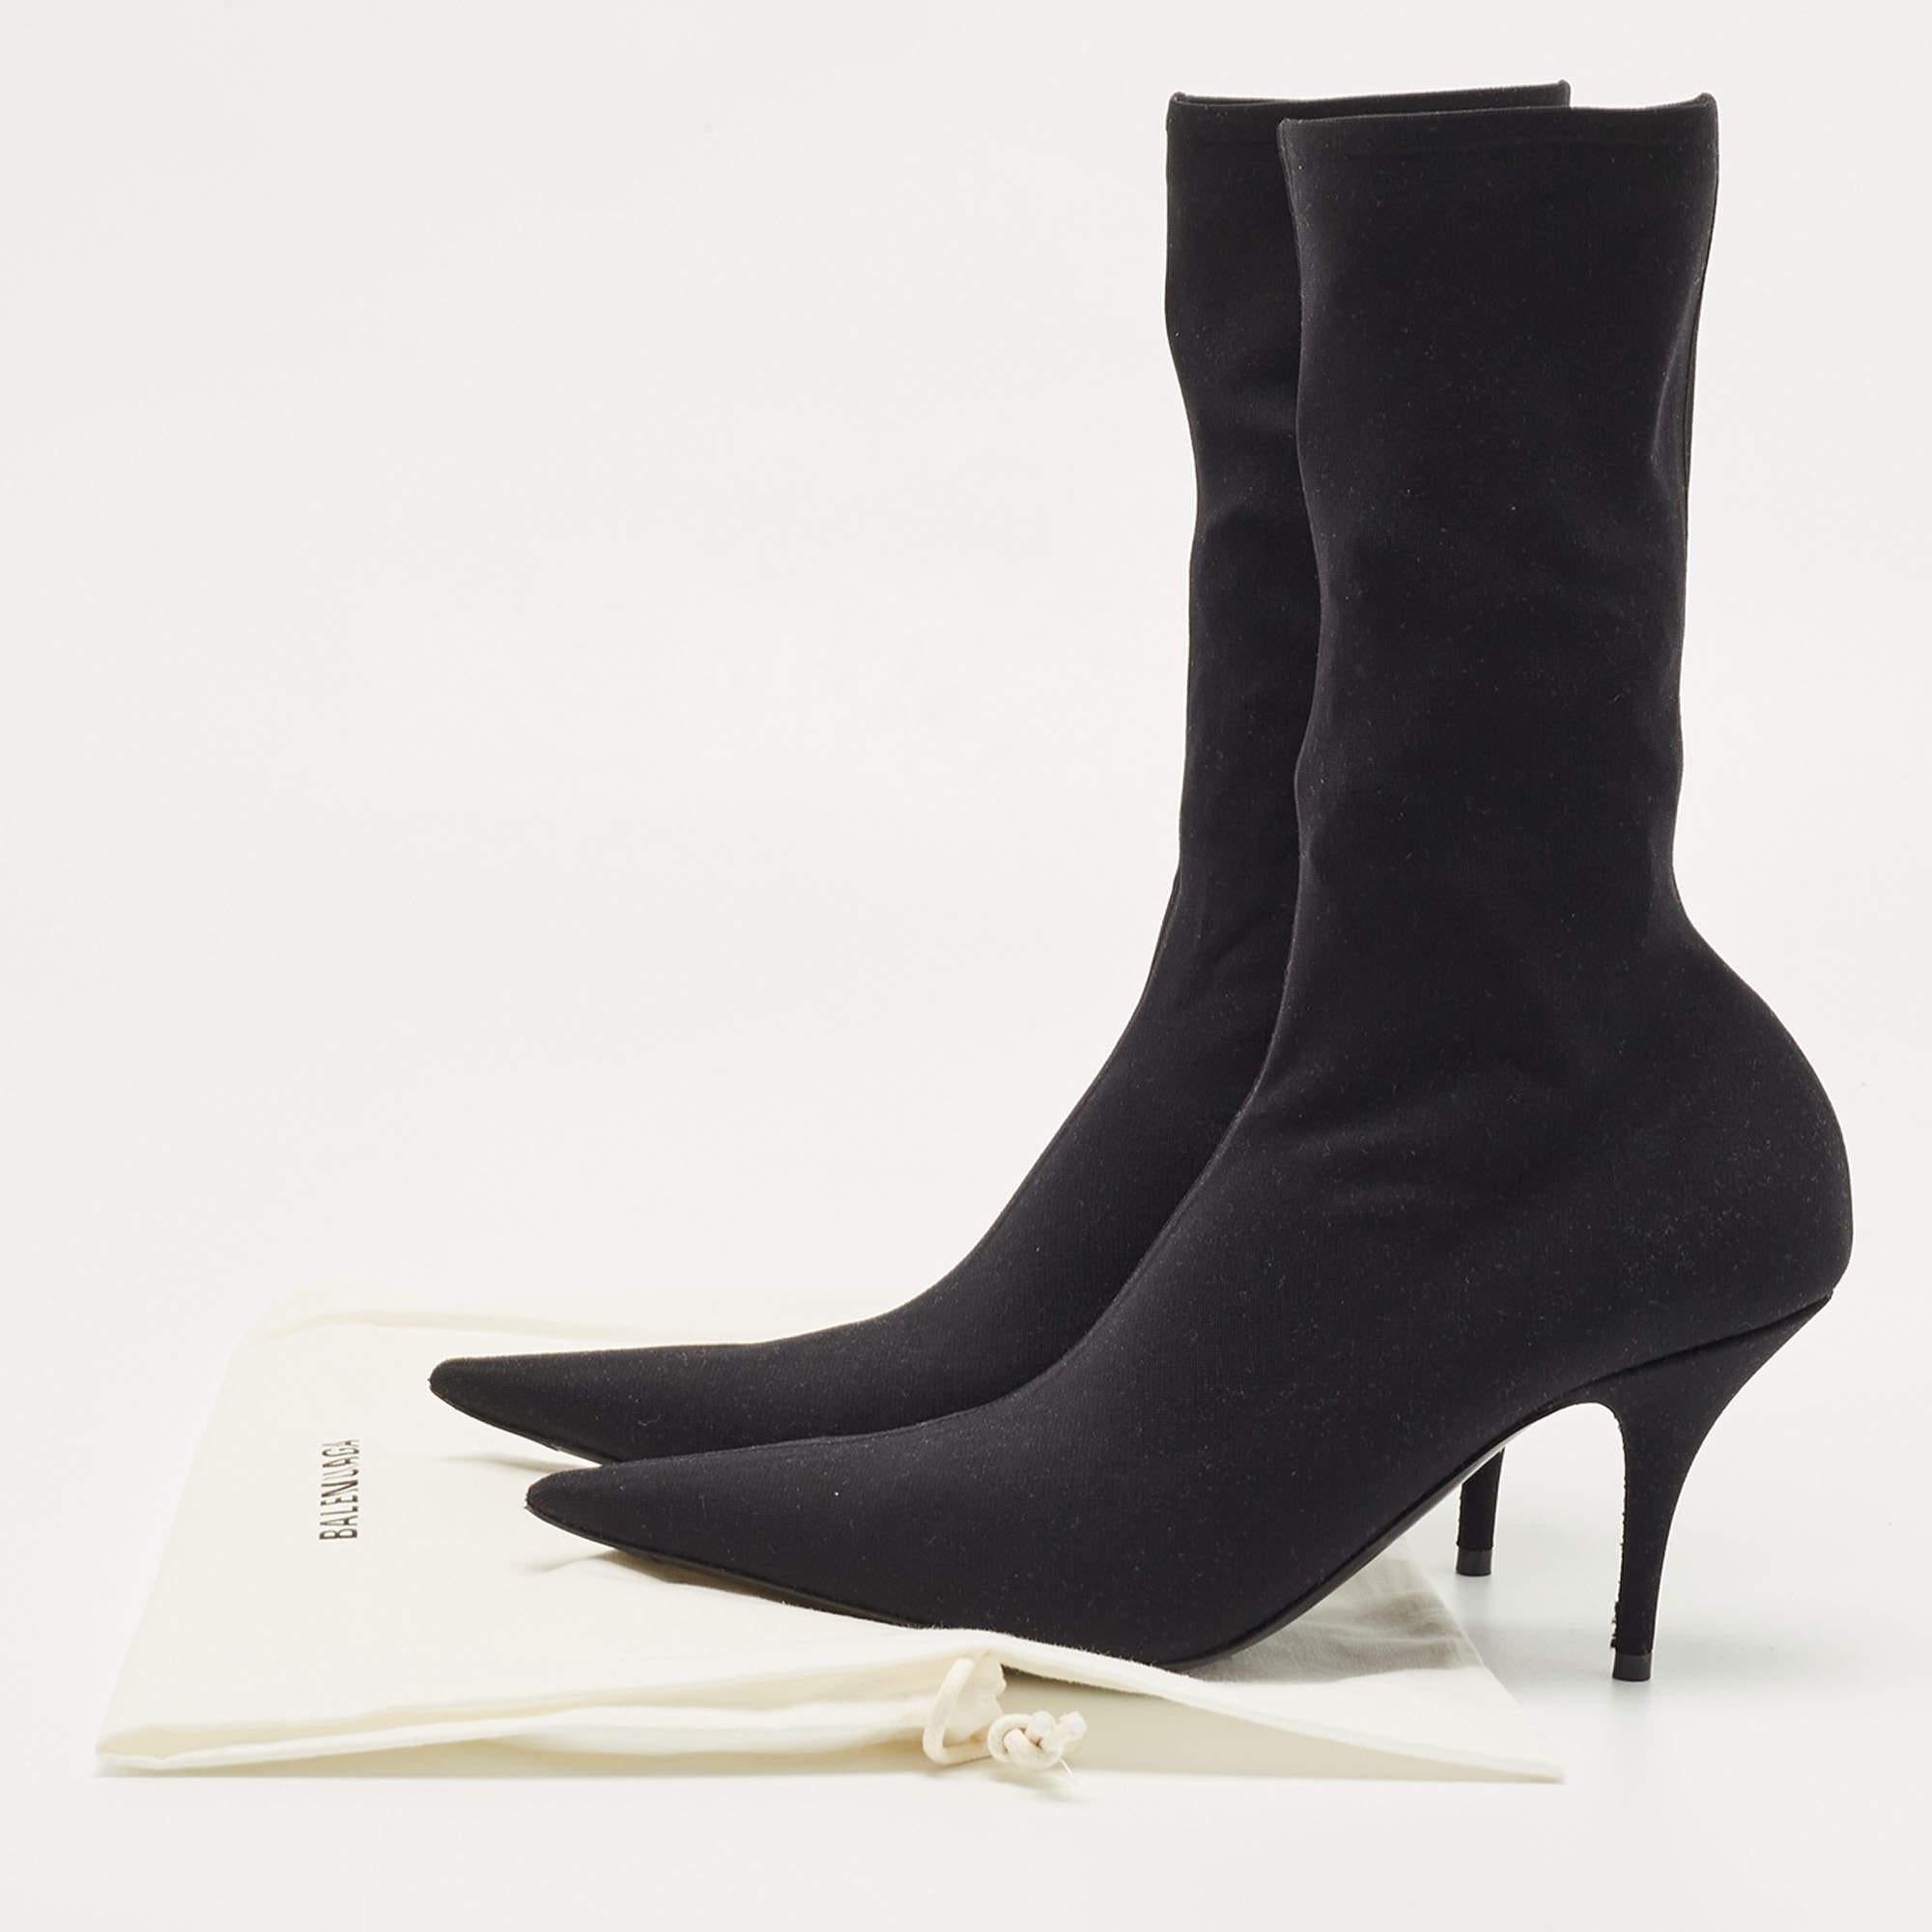 Deliver statement looks with these black Knife booties from Balenciaga! From their shape and detailing to their overall appeal, they exude sophisticated style.

